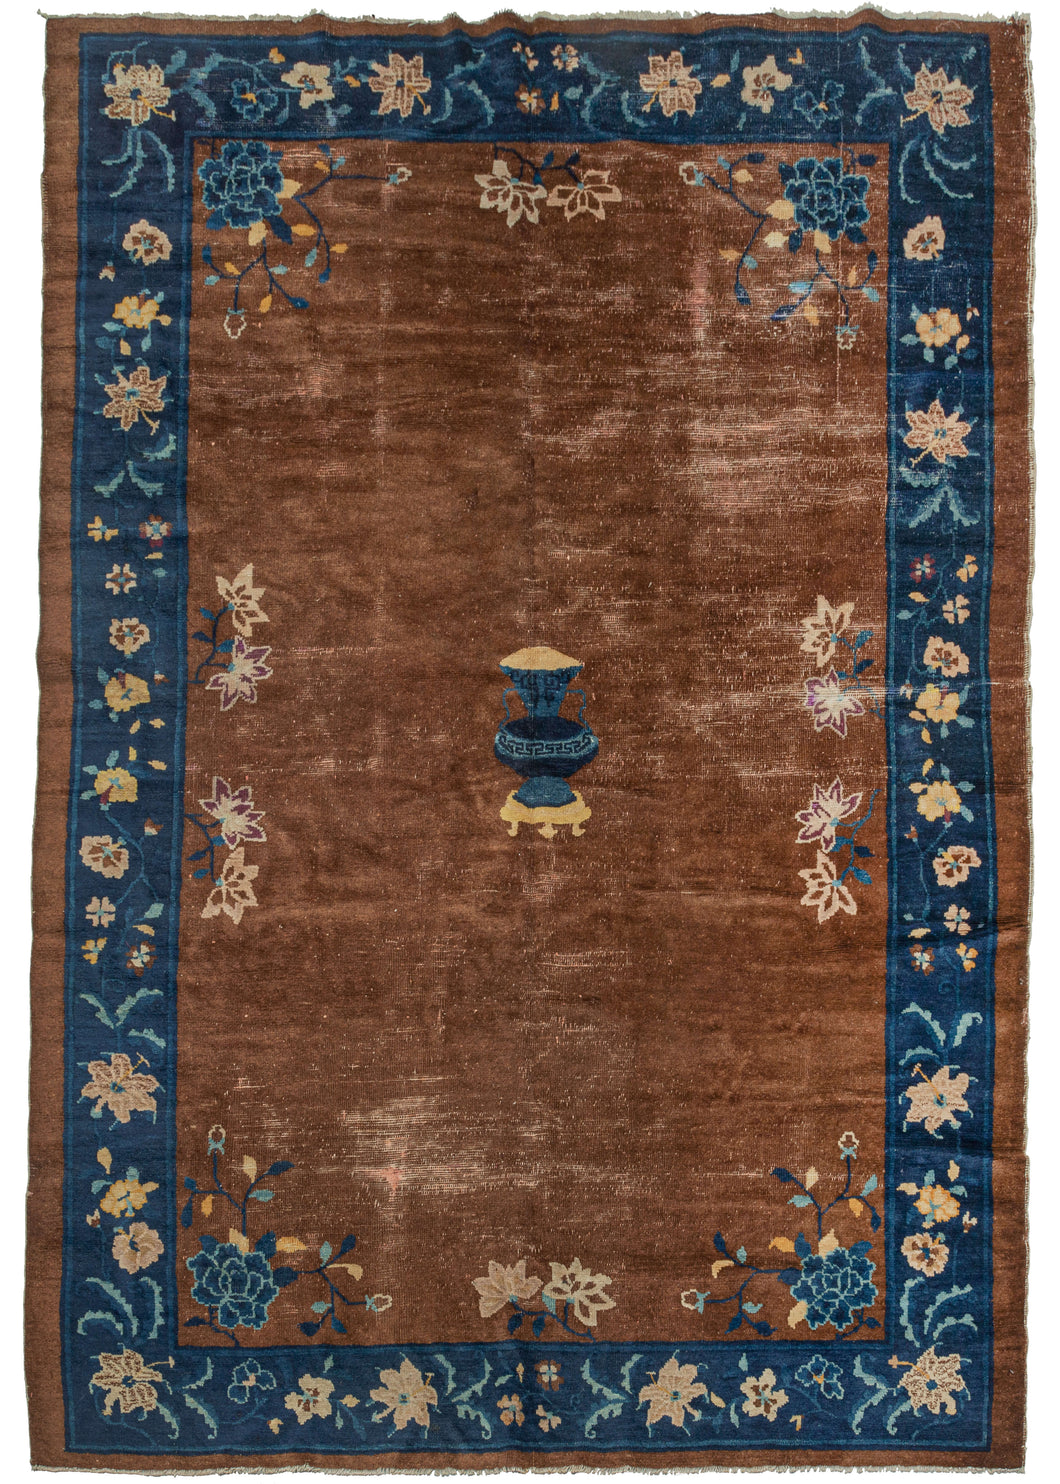 Antique Chinese Peking area rug featuring a deep chocolate field with an indigo blue border. A central vase motif is framed scrolling blossoming lotuses in the corners of the field. The main border contains an elegant floral motif that blends in seamlessly.